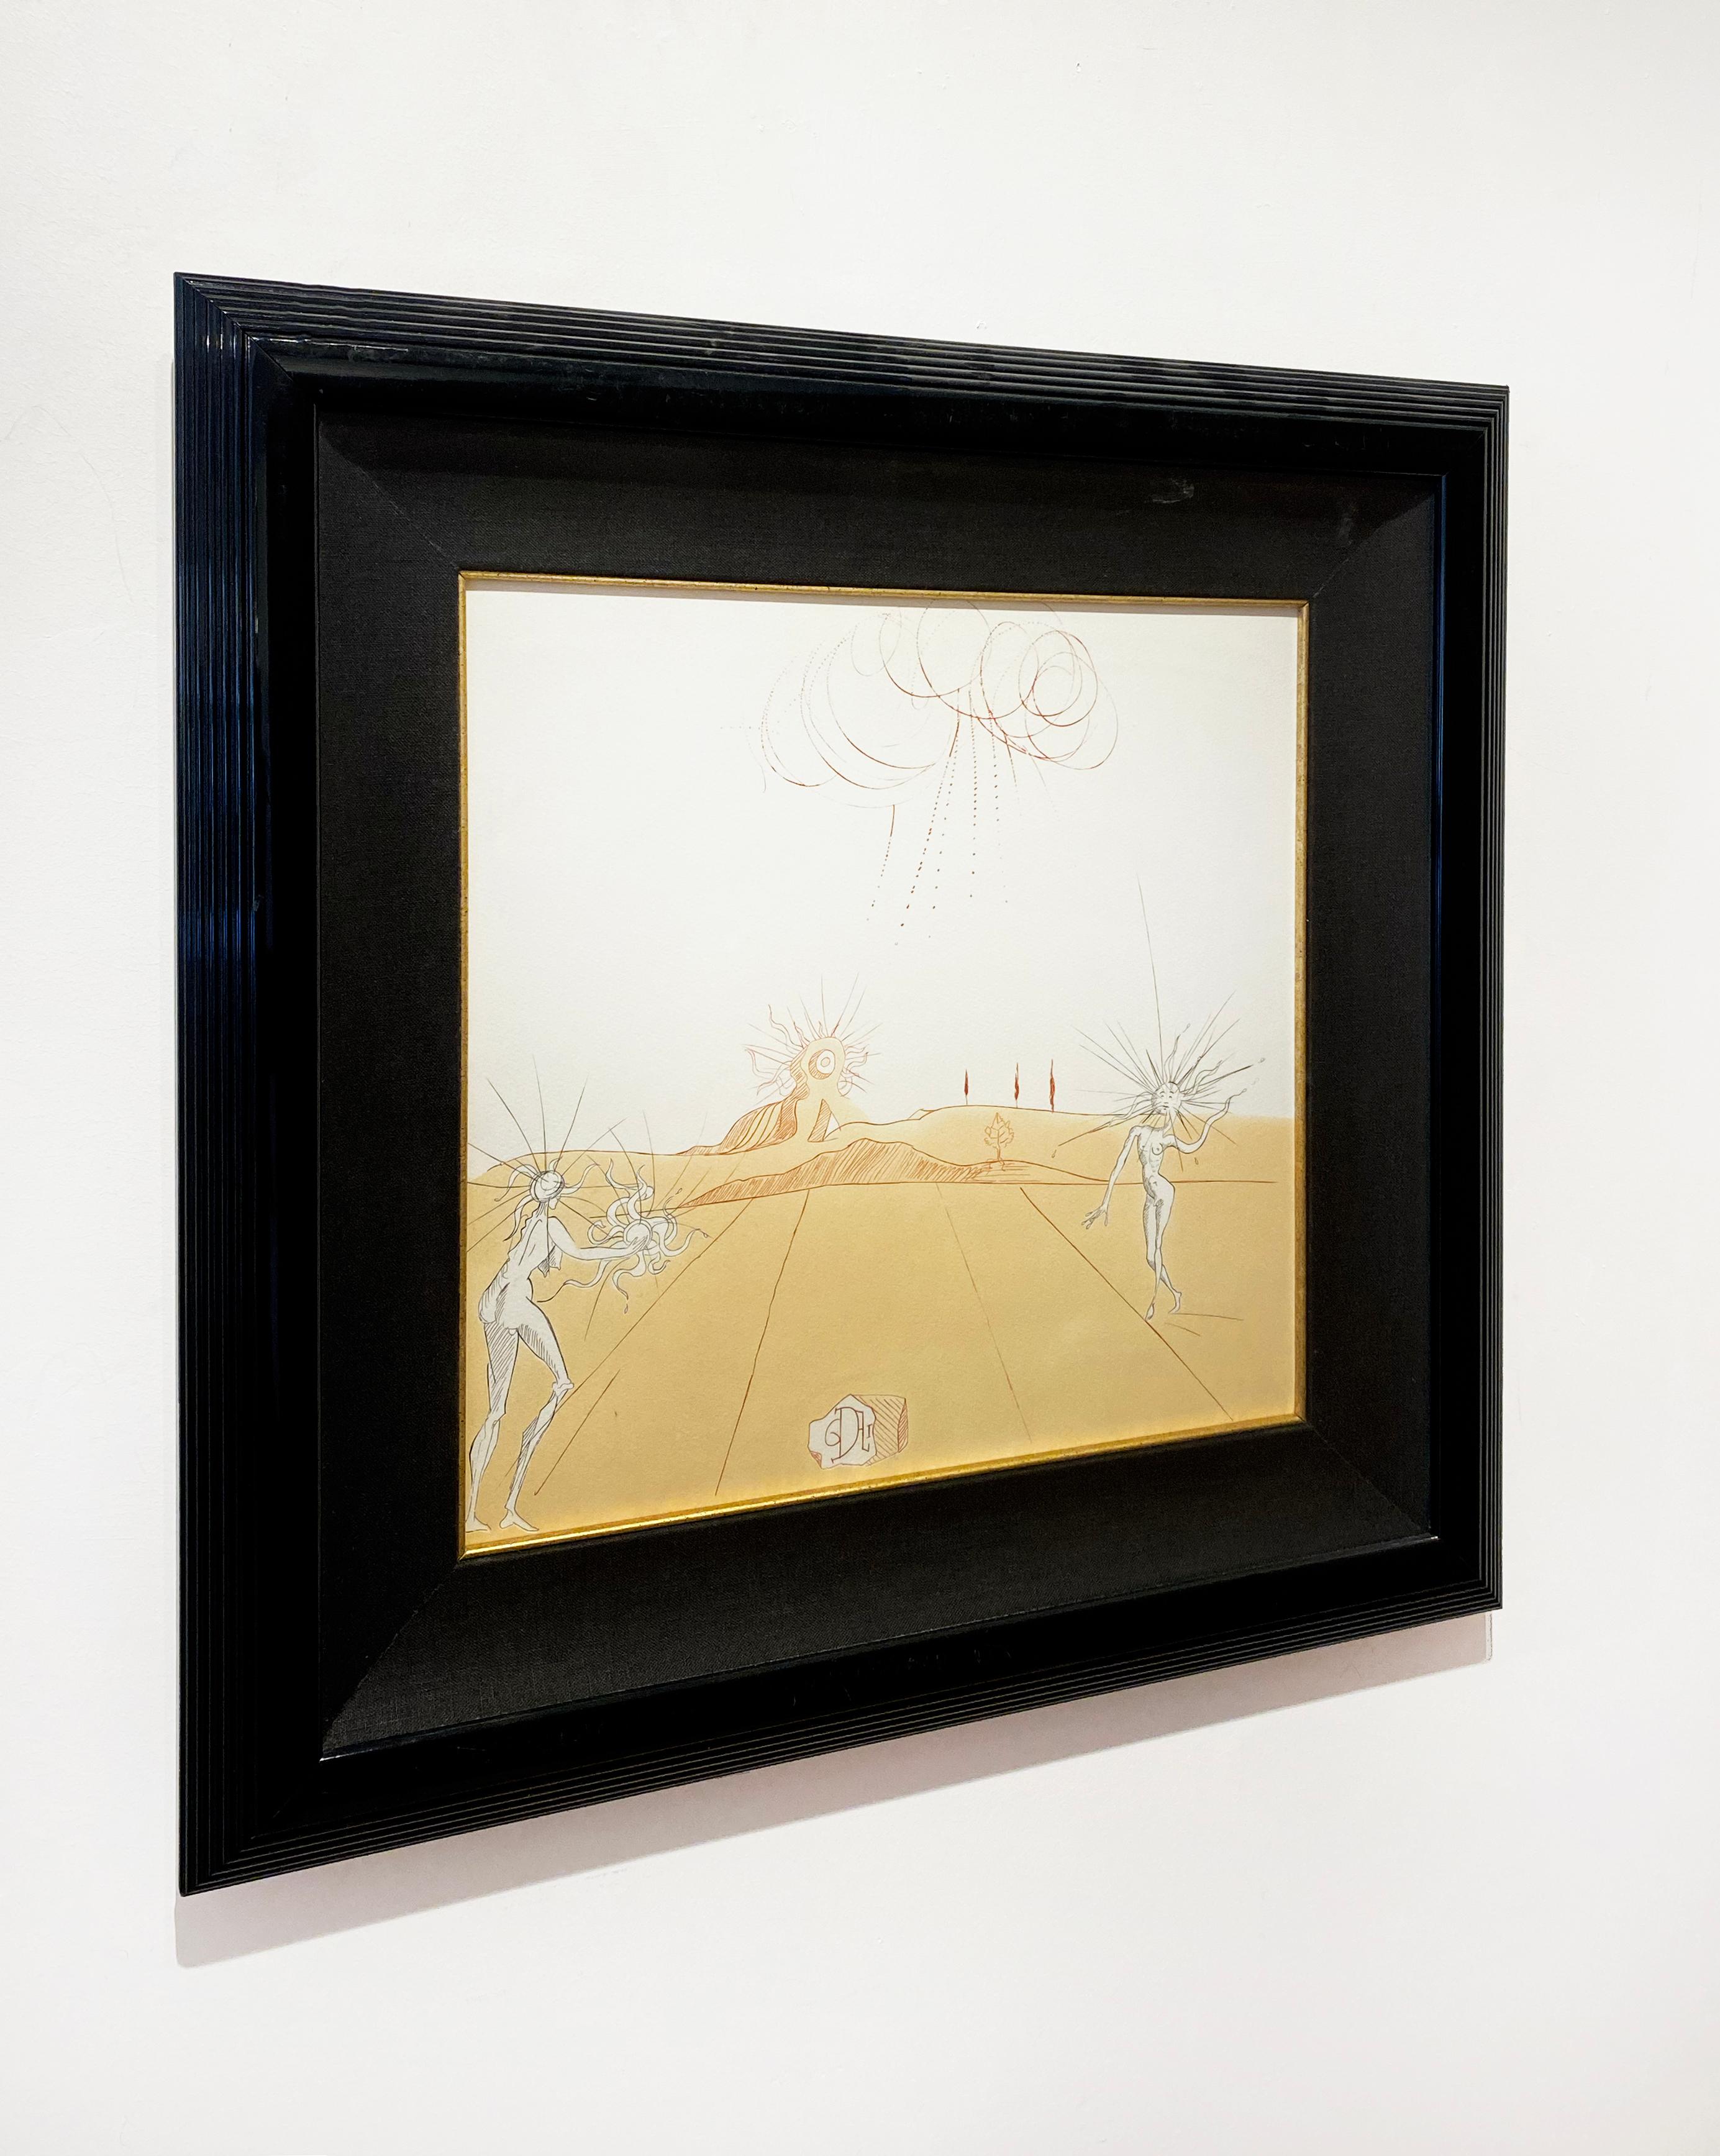 Artist:  Dali, Salvador
Title:  Paysage Avec Figures-Soleil
Series:  Neuf Paysages
Date:  1980
Medium:  Aquatint and photogravures with black drypoint remarques
Framed Dimensions:  22.5